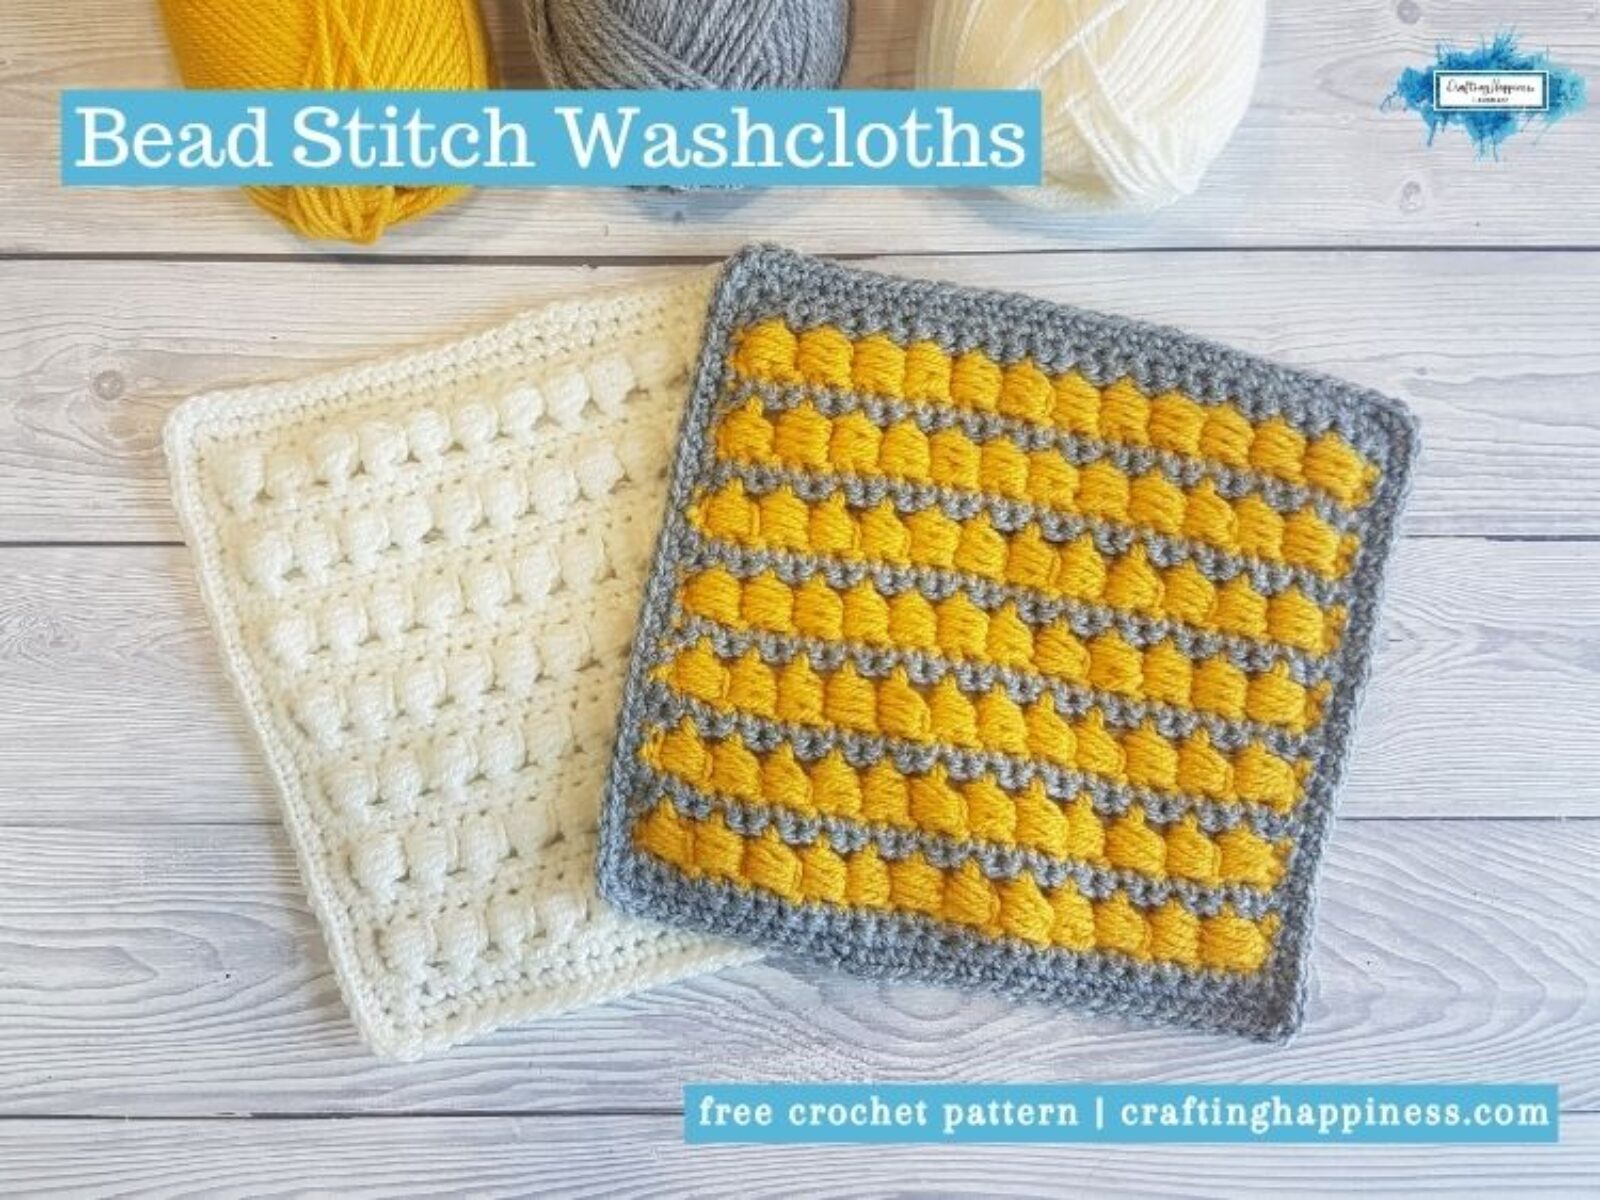 Bead Stitch Washcloths by Crafting Happiness FACEBOOK POSTER